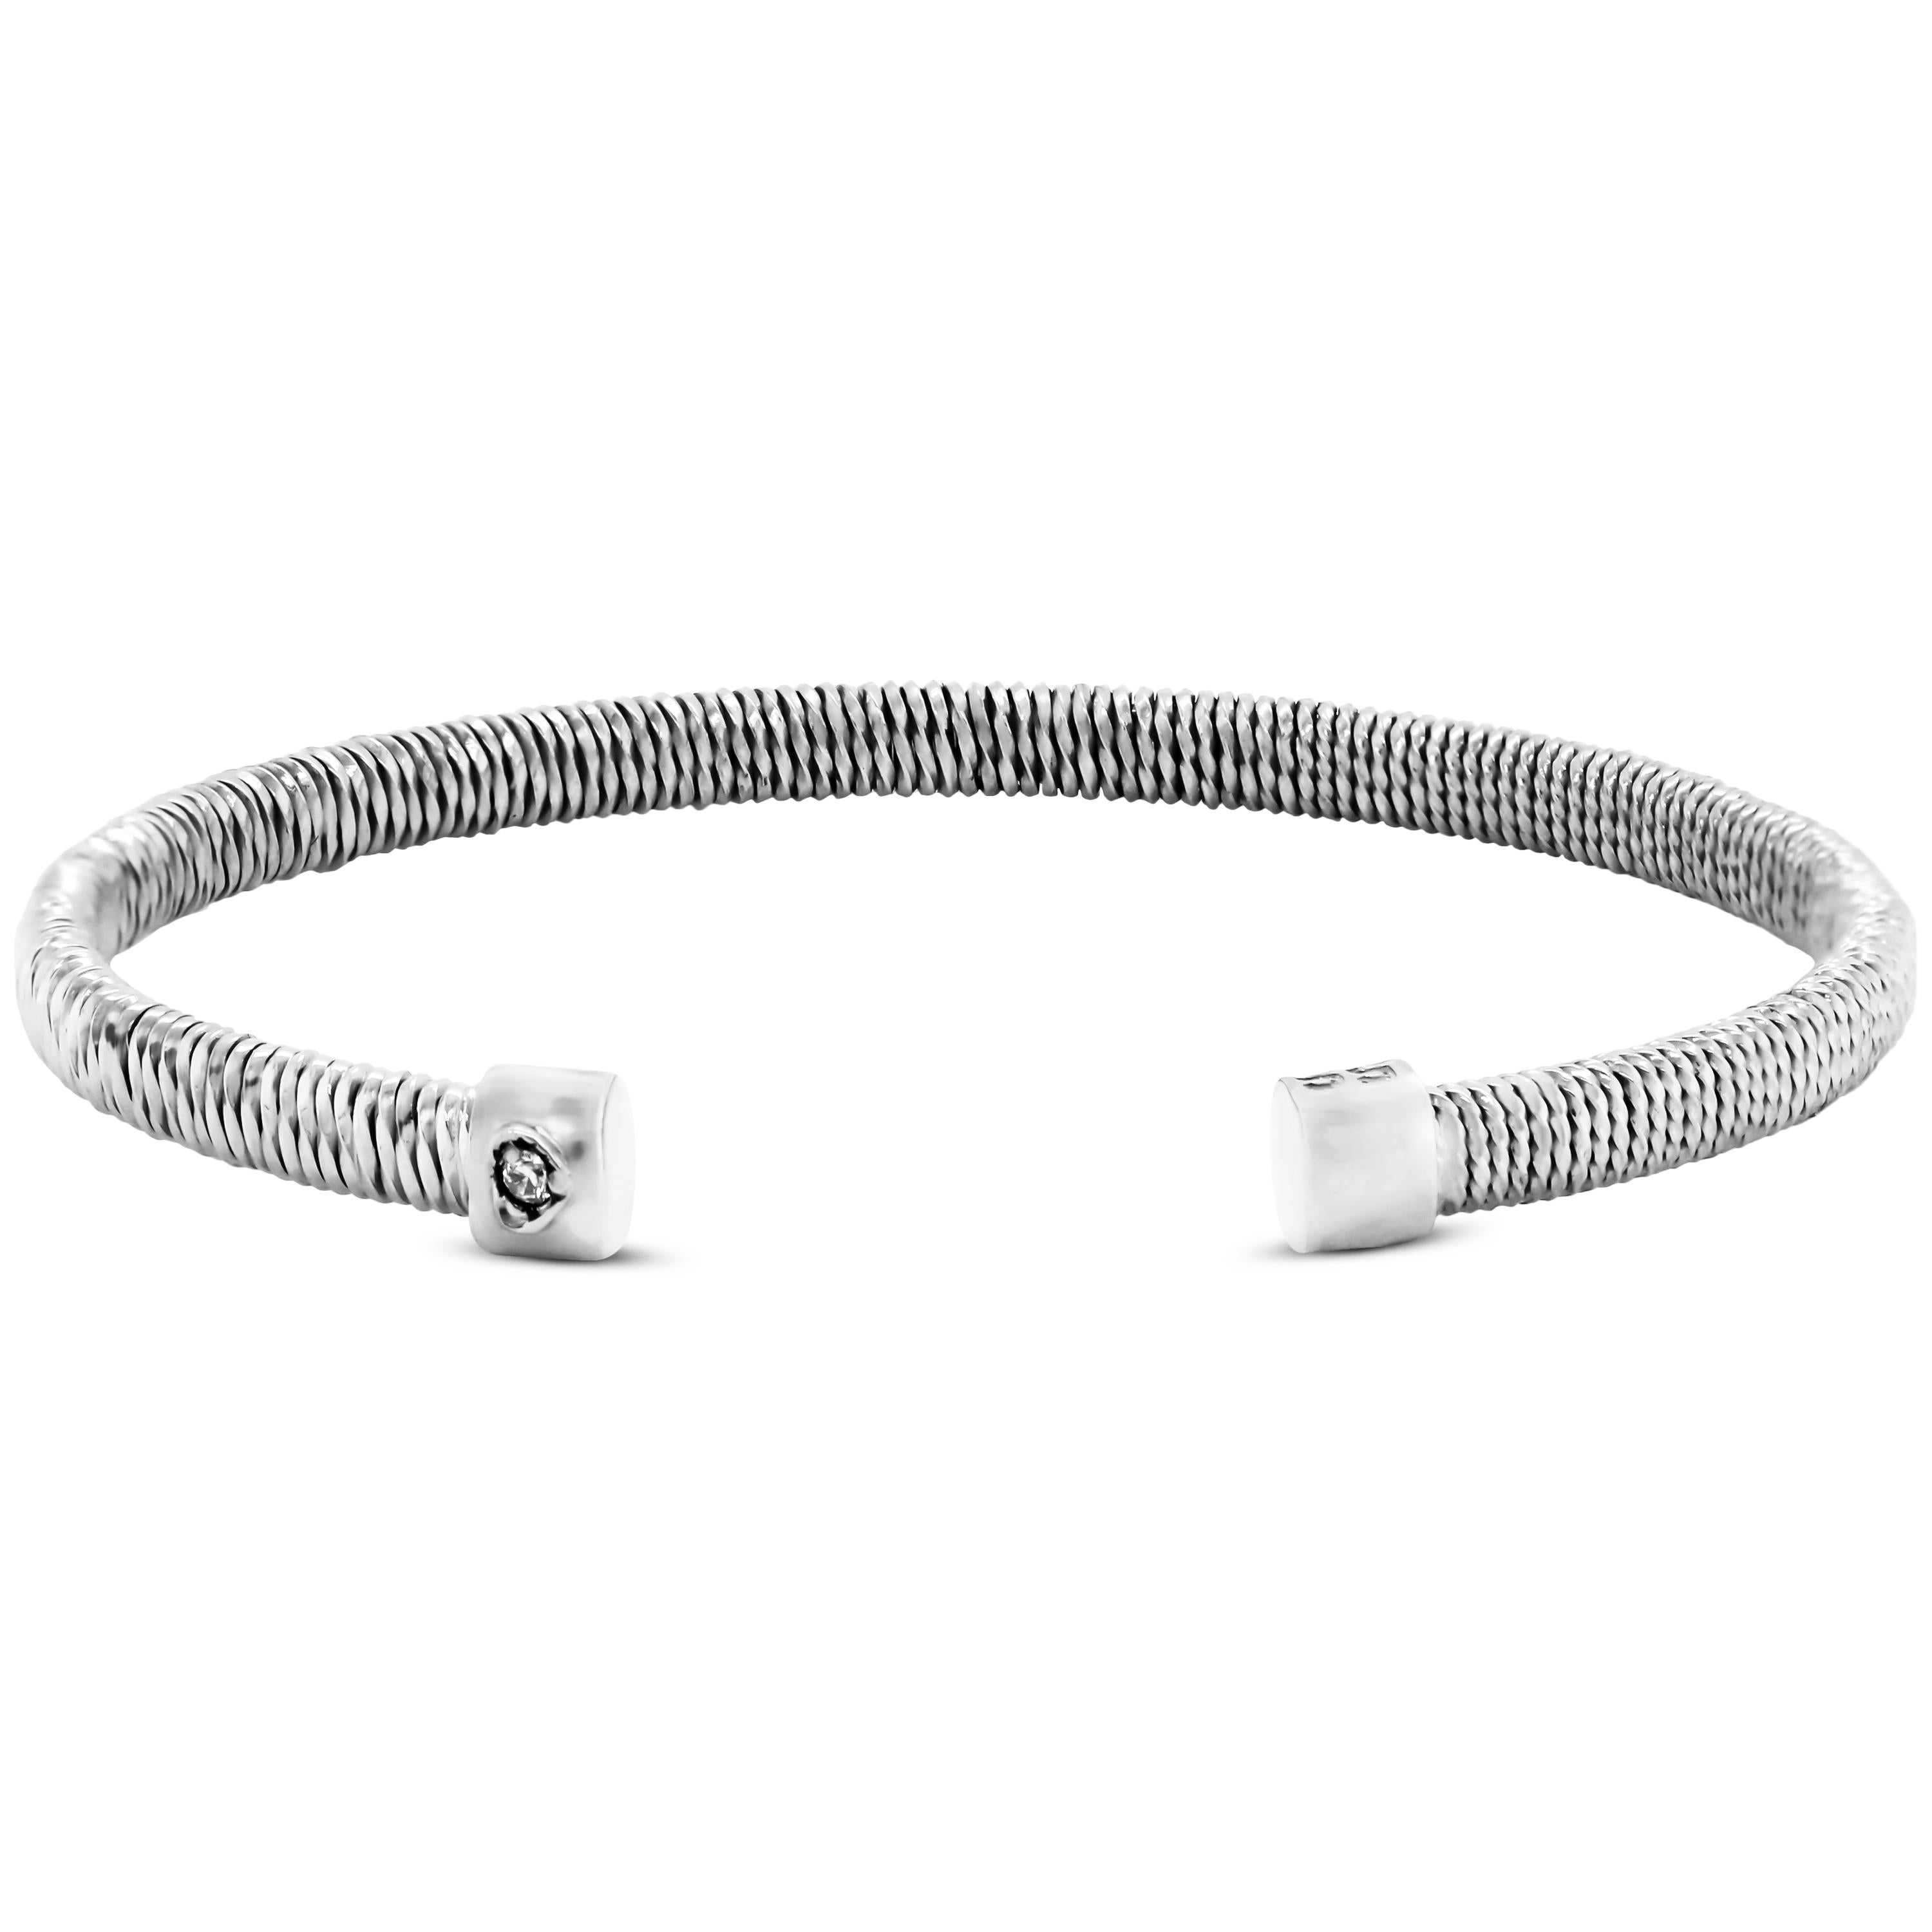 18K White Gold Thin Bangle Bracelet by Stambolian

This bracelet features high-polshed, woven-like textured gold that makes up the bracelet entirely

Bracelet is a size 7. 5mm width

Signed Stambolian and has the Trademark 